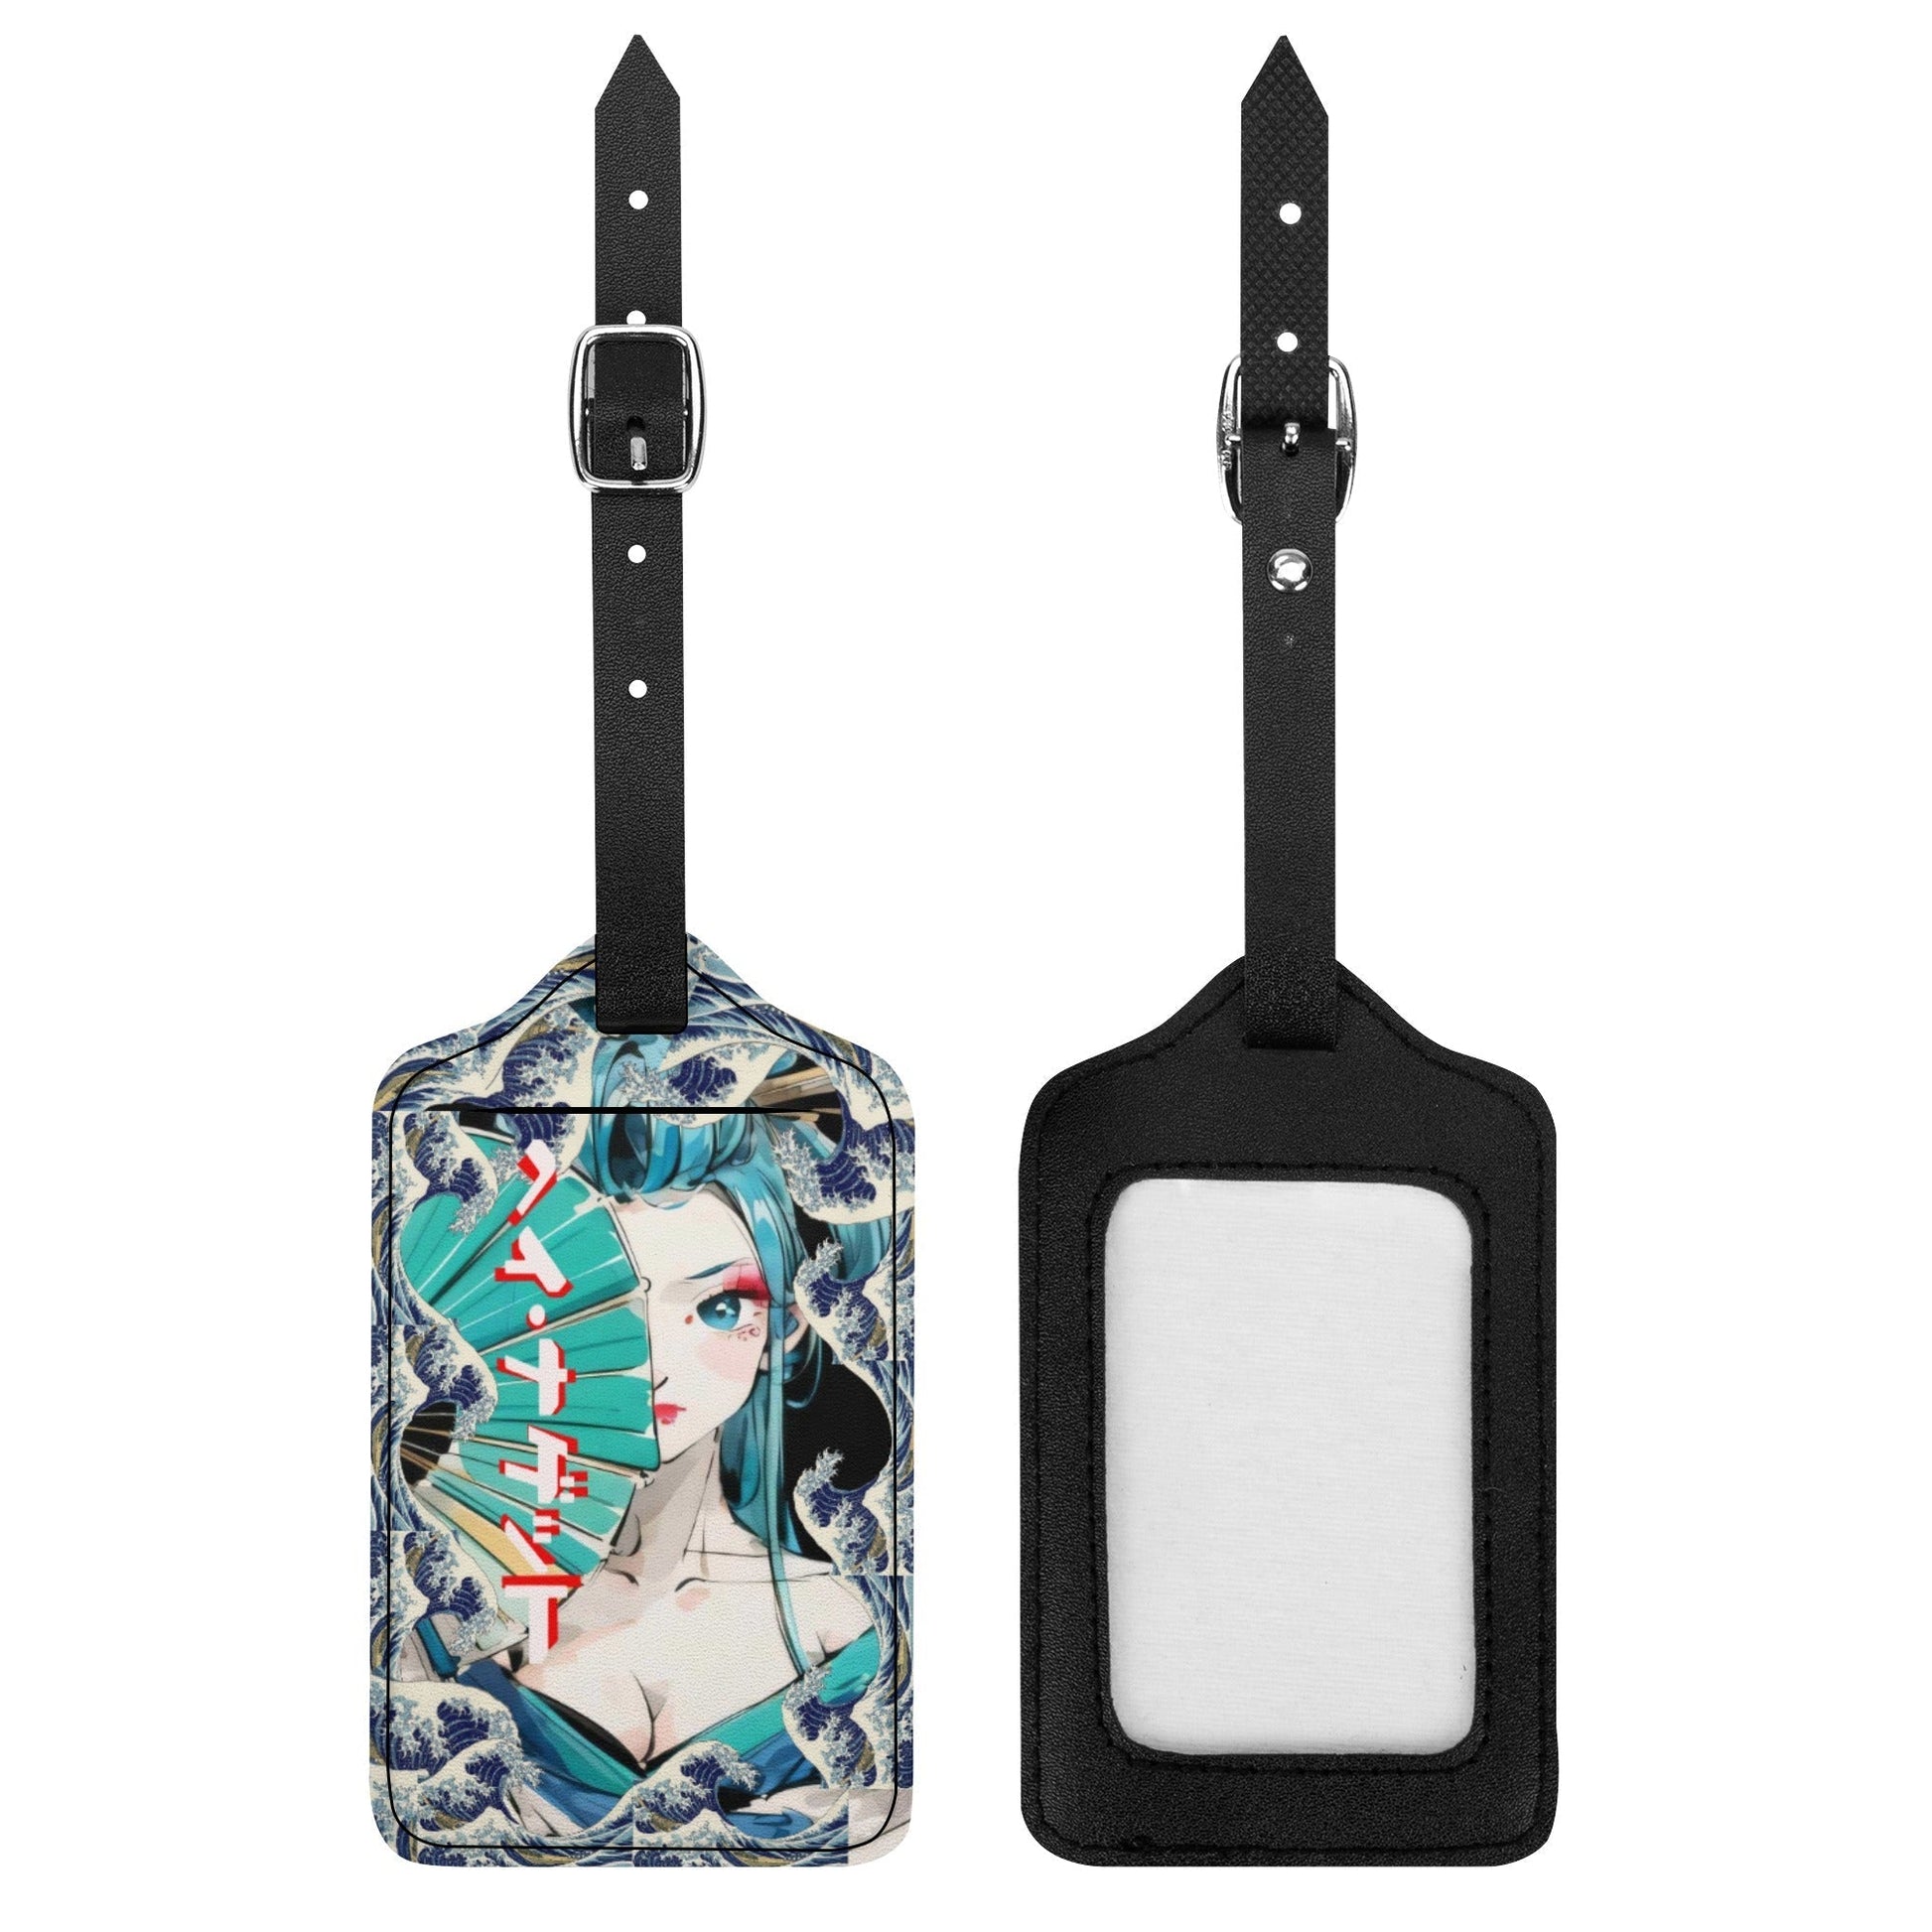 Stand out  with the  Tokyo Nugget Luggage Tags  available at Hey Nugget. Grab yours today!